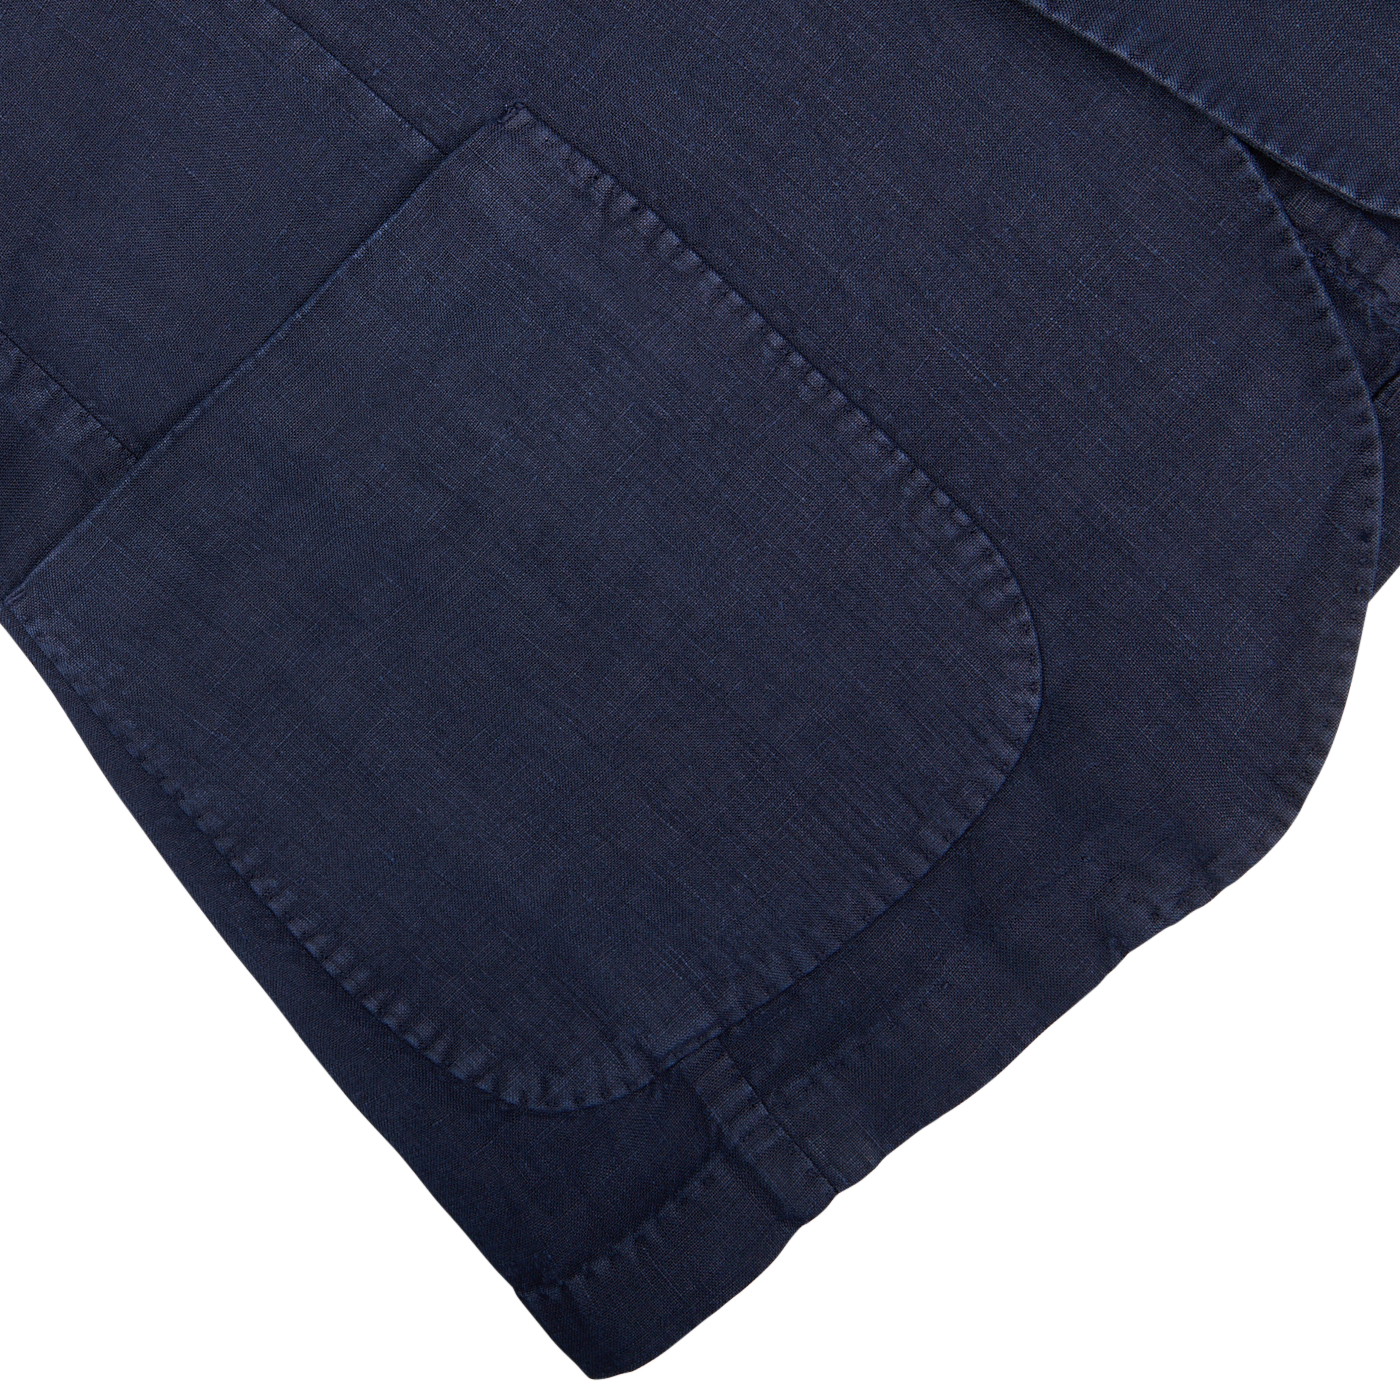 Close-up of a Navy Blue Washed Linen Blazer from L.B.M. 1911 with quilted stitching and a pocket detail, tailored for a blazer.